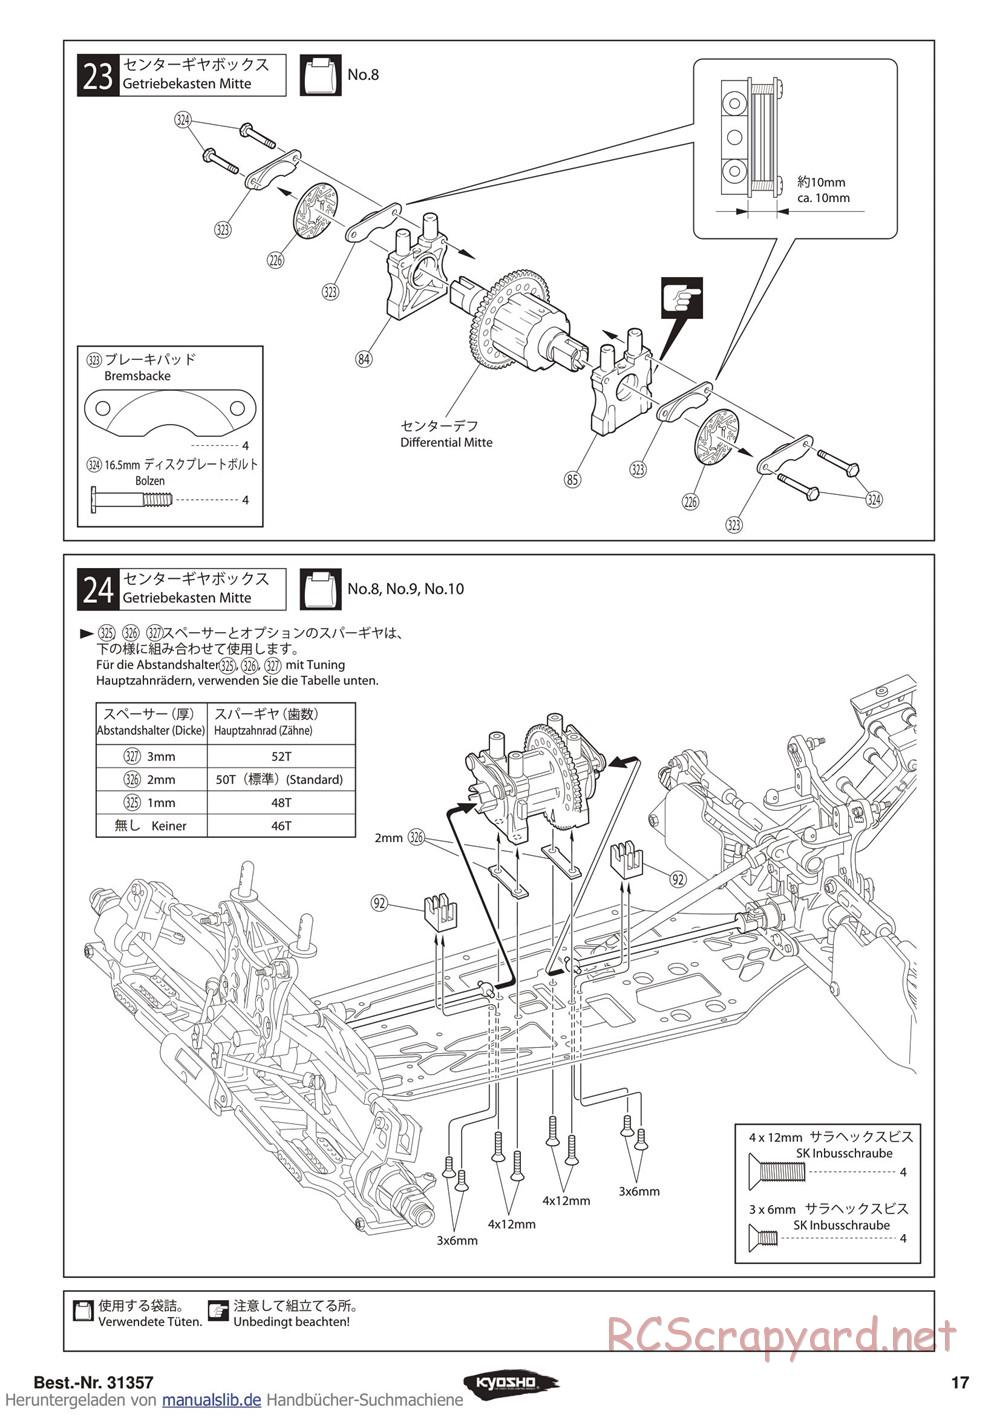 Kyosho - Inferno ST-RR Evo - Manual - Page 17